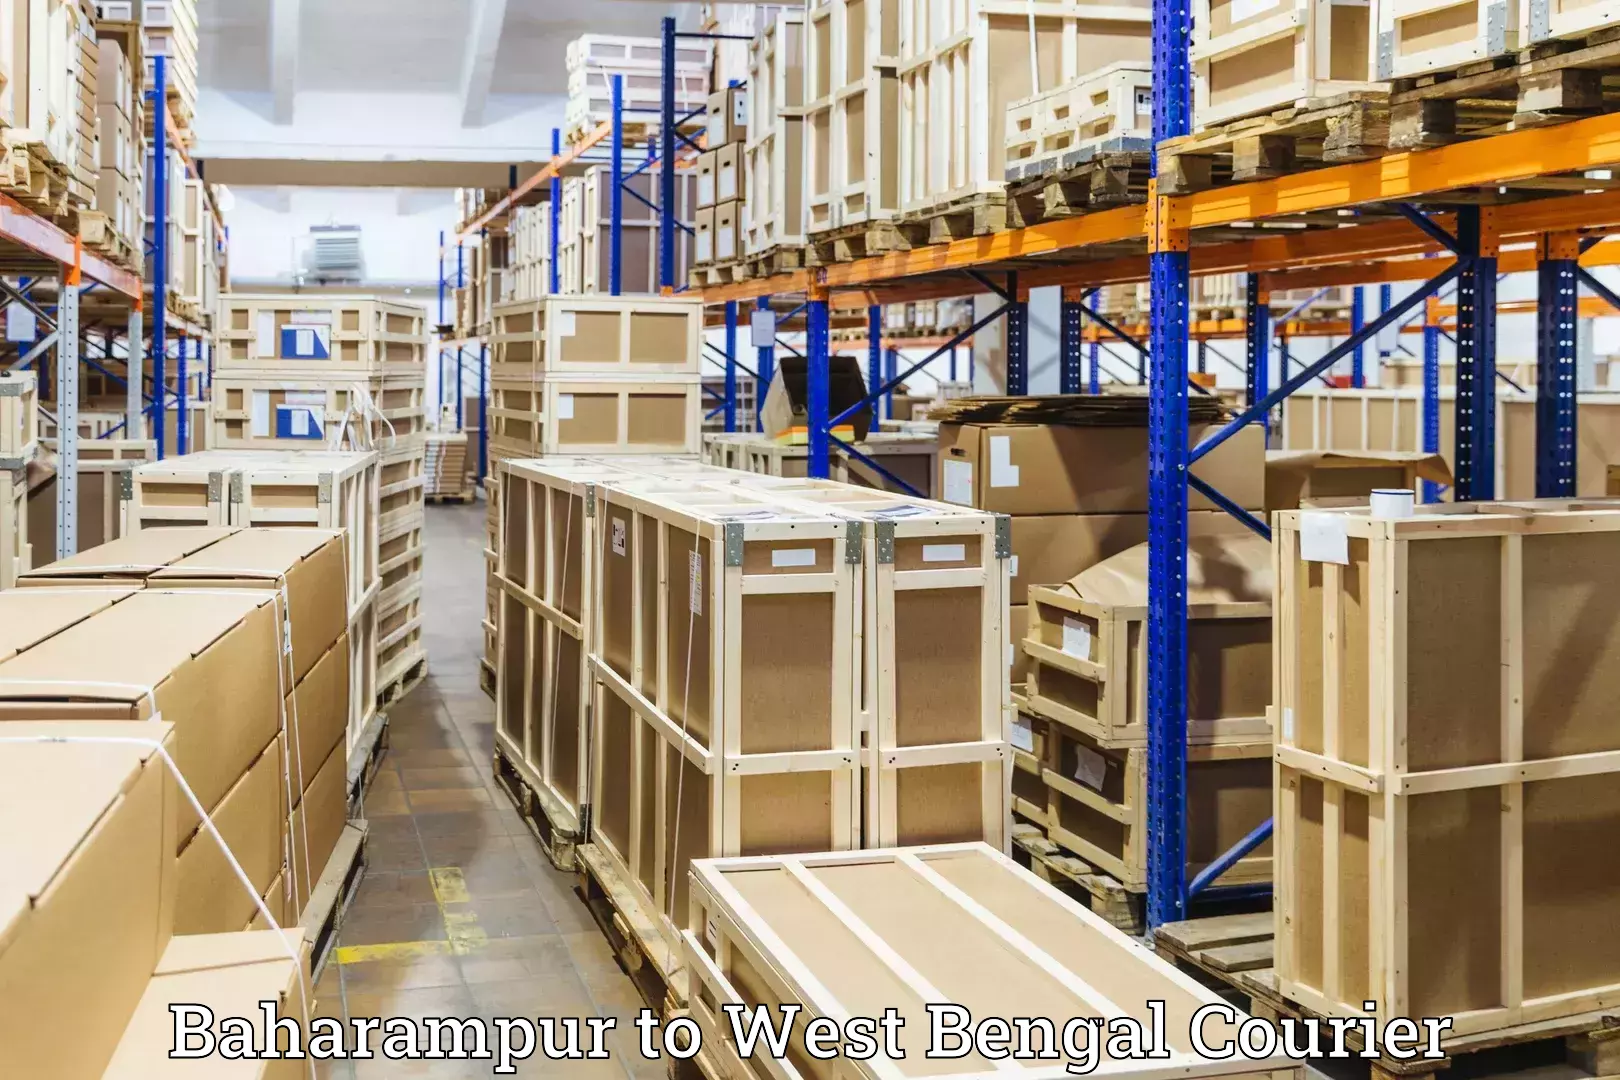 Luggage shipment specialists Baharampur to Kolaghat